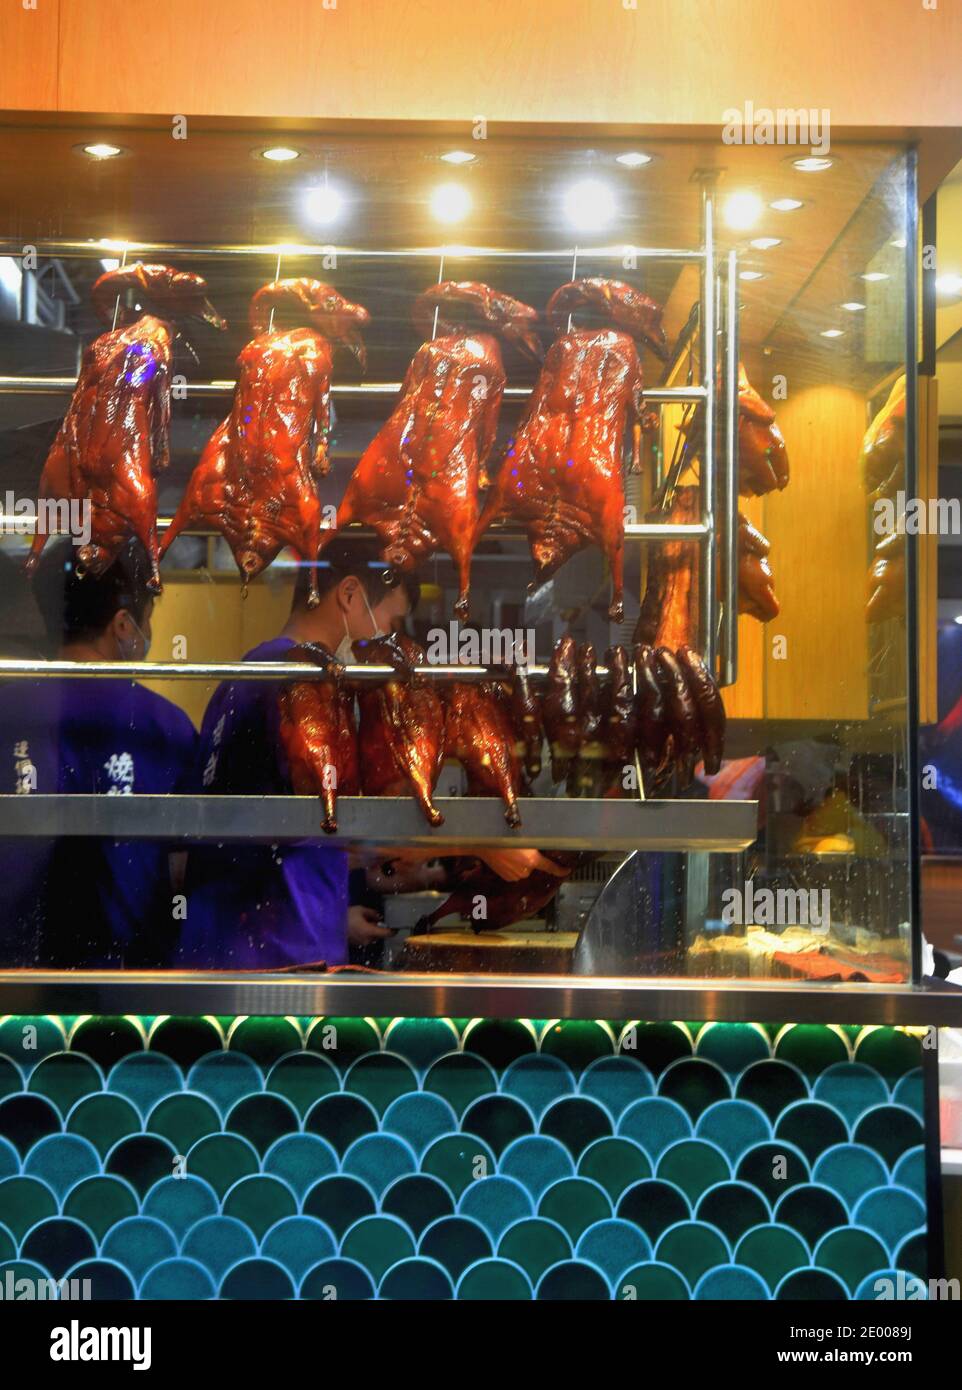 Cantonese style roasted goose counter in food shop, Hong Kong Stock Photo